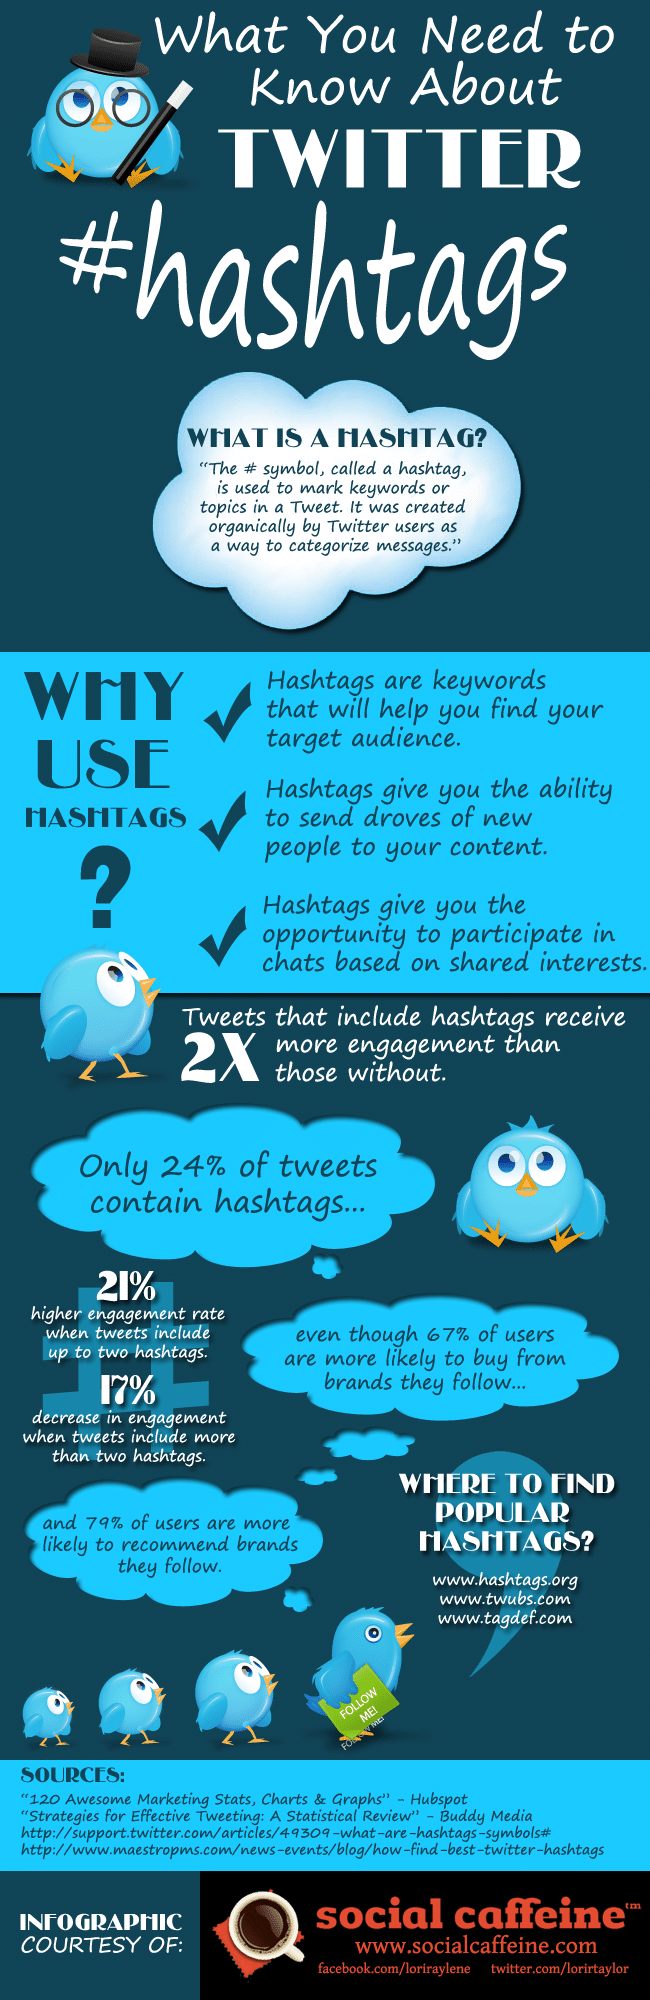 twitter-hashtags-power-guide-infographic